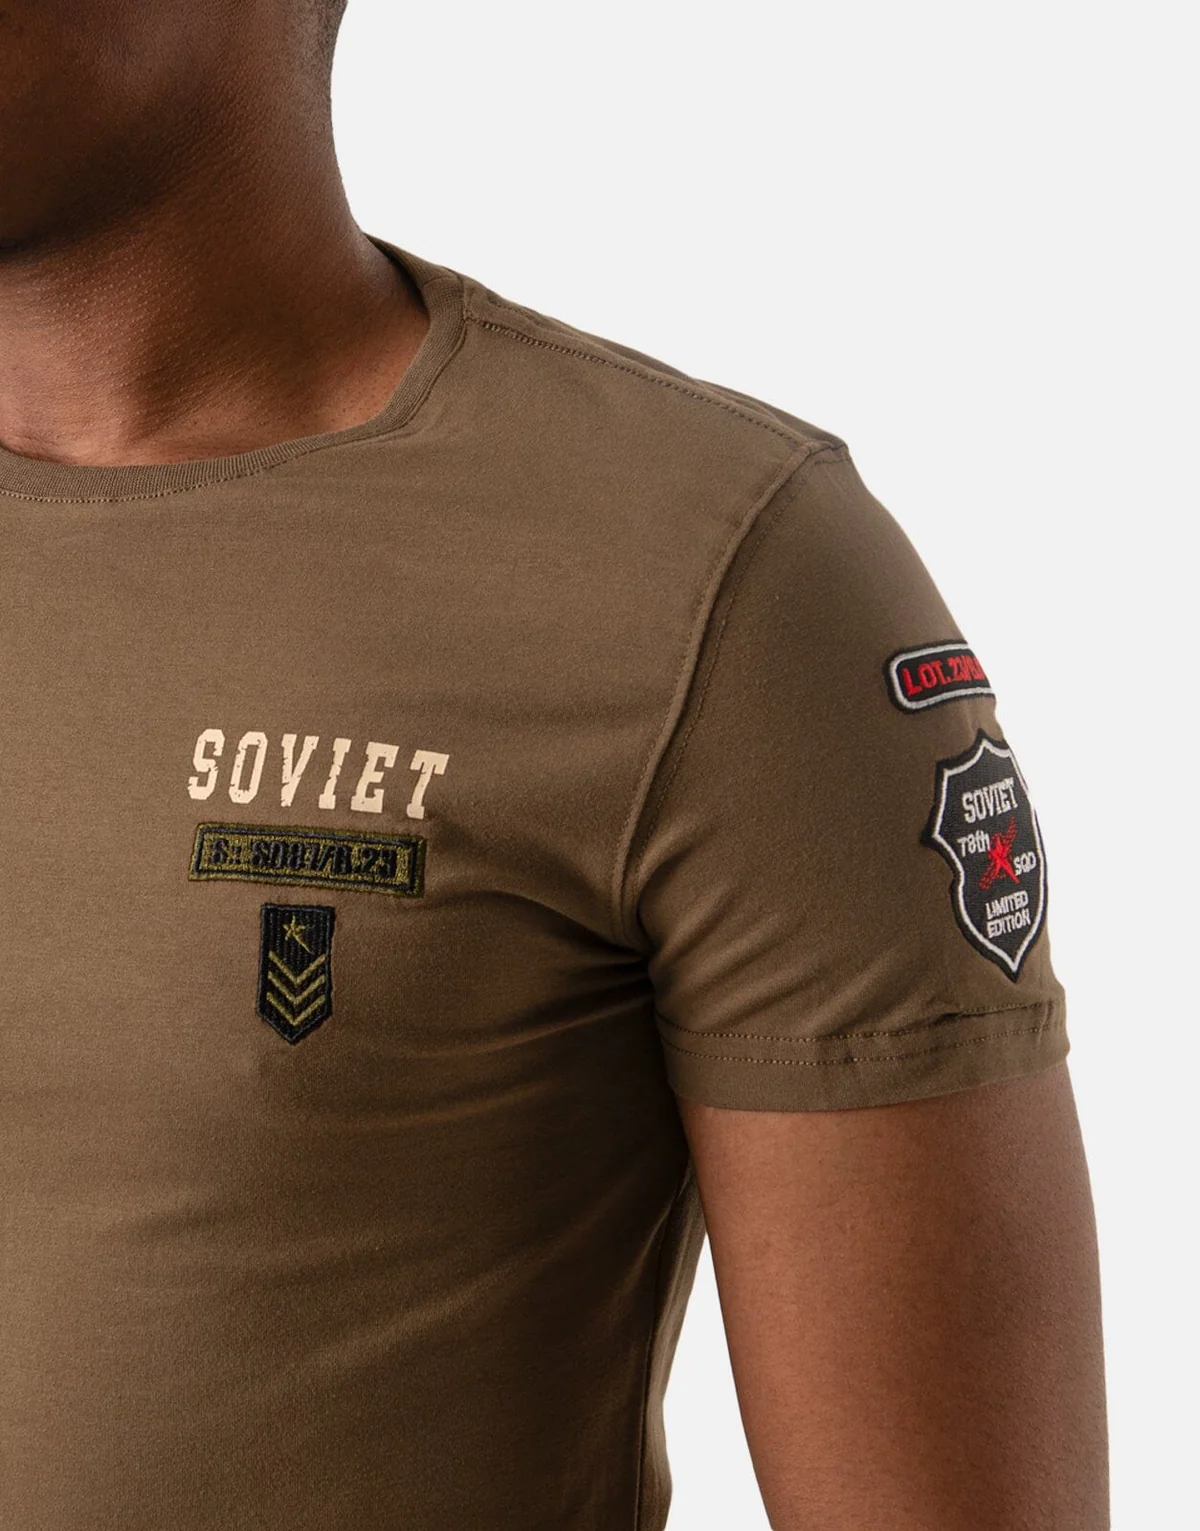 SOVIET SVT 8866 M-OFFICIAL S/S FASHION TEE-OLIVE